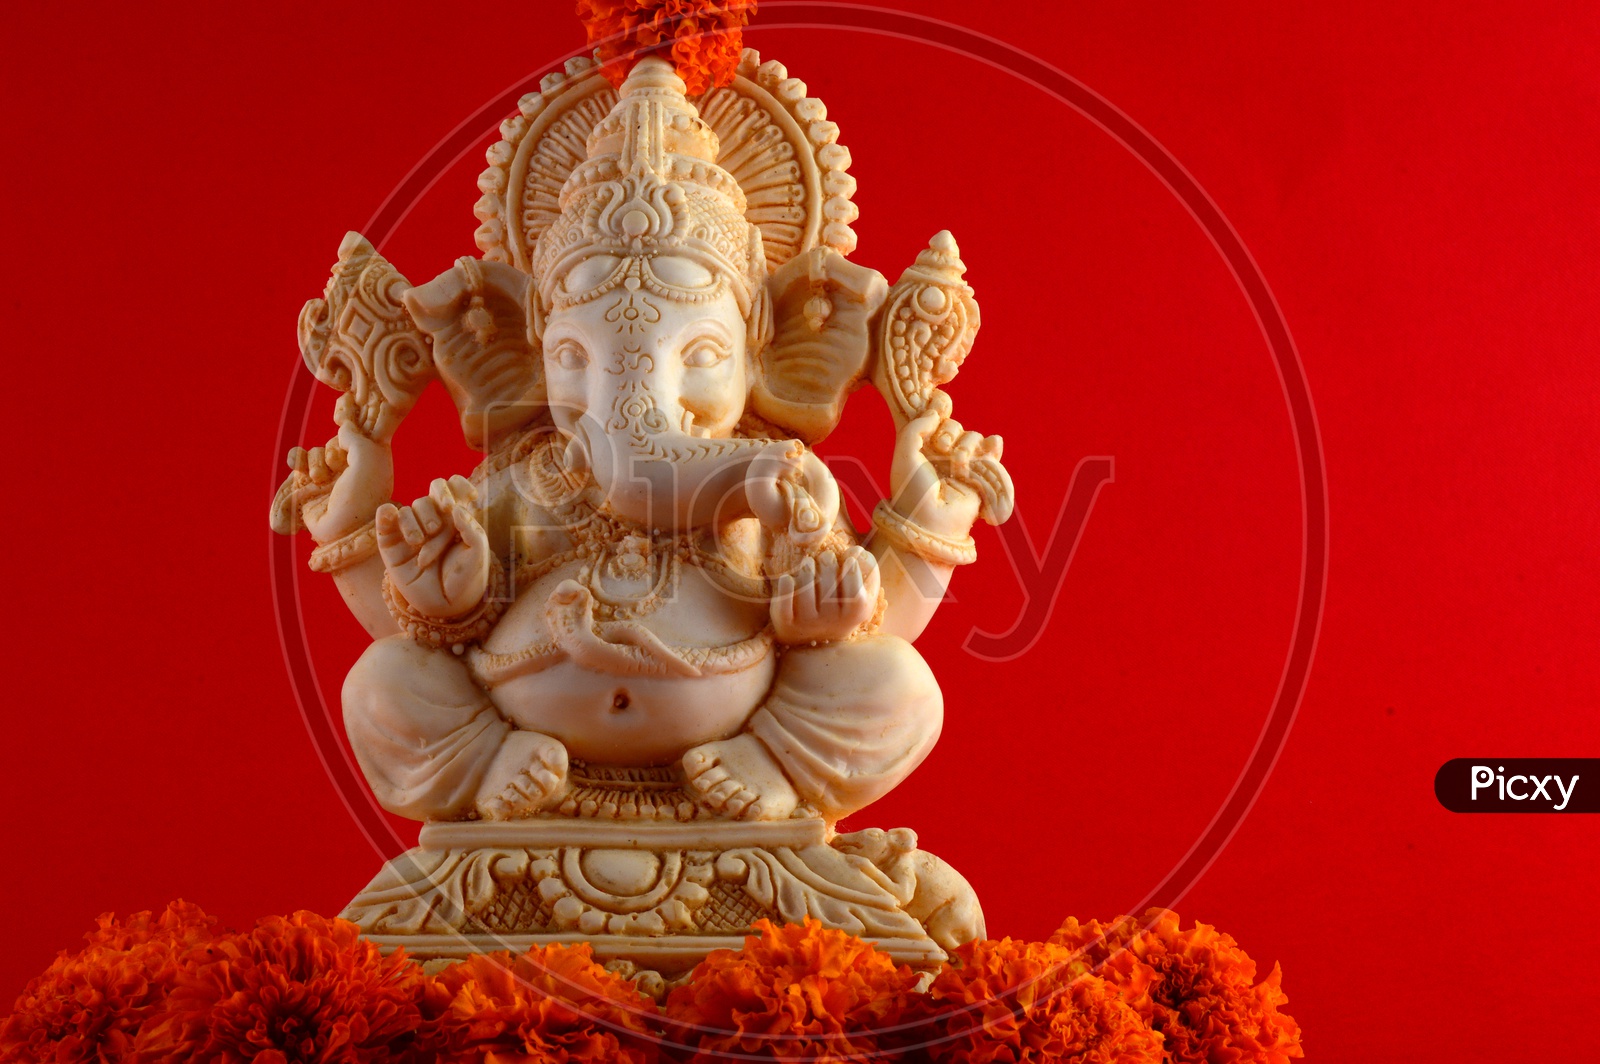 Indian Hindu God , Lord Ganesh Idol On an Isolated Background For Ganesh Festival Wishes or Greetings Template